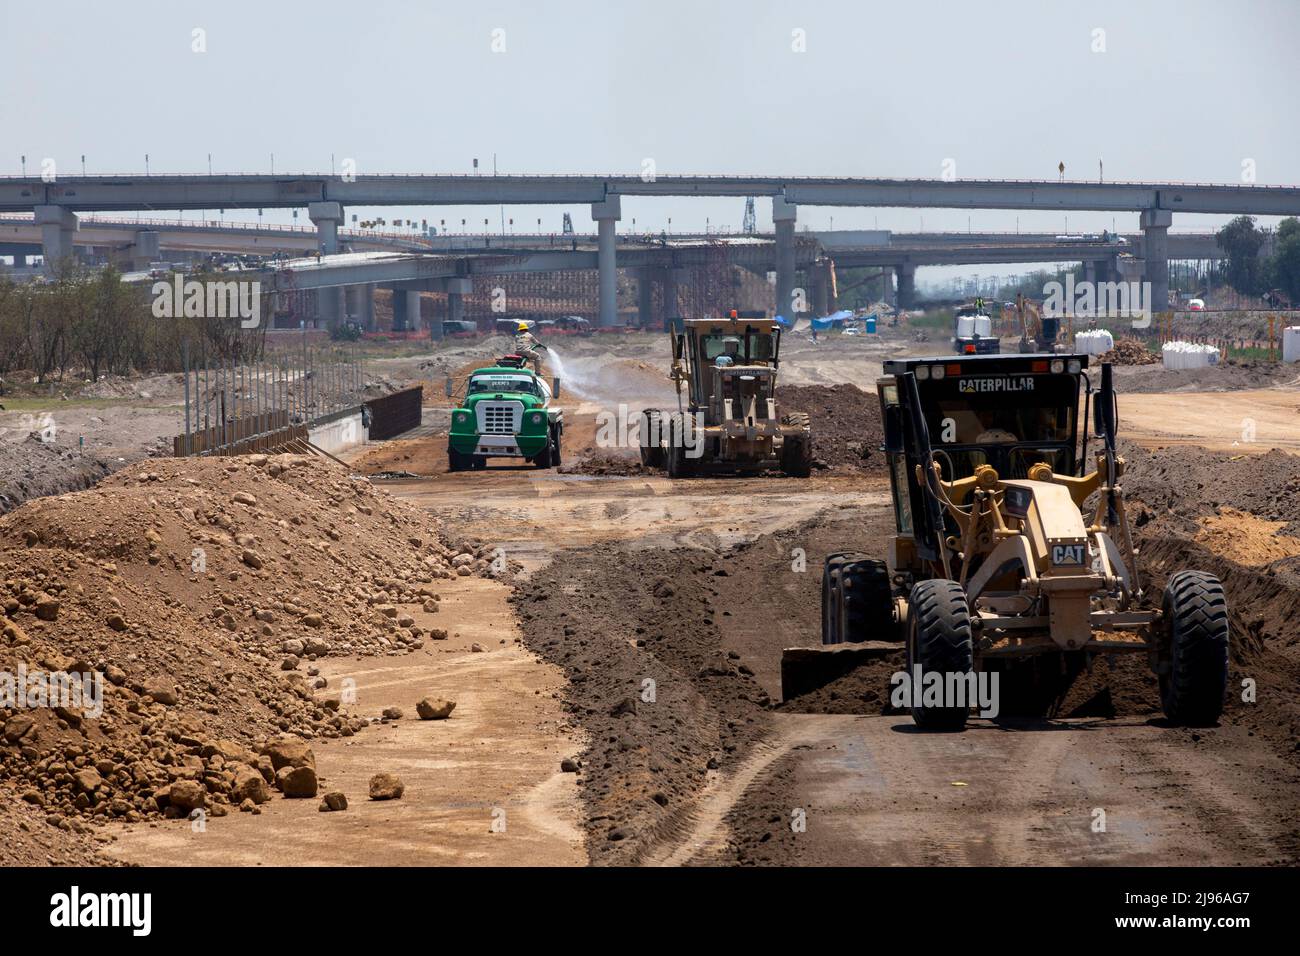 A motor grader prepares the ground for the Suburban Train railway that will connect Felipe Angeles Airport with Mexico City Stock Photo